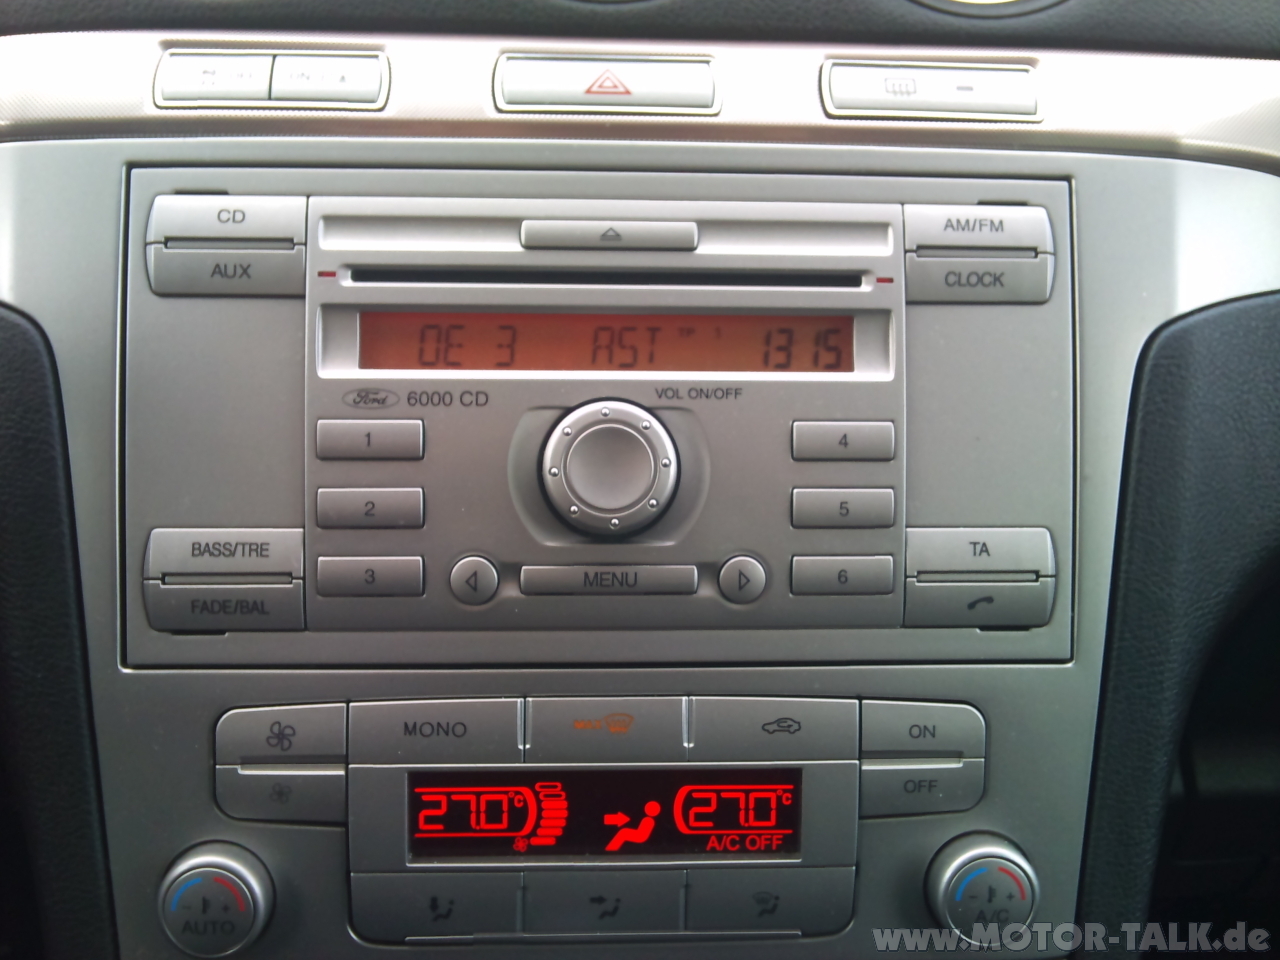 Ford s-max audiosystem 6000cd #2